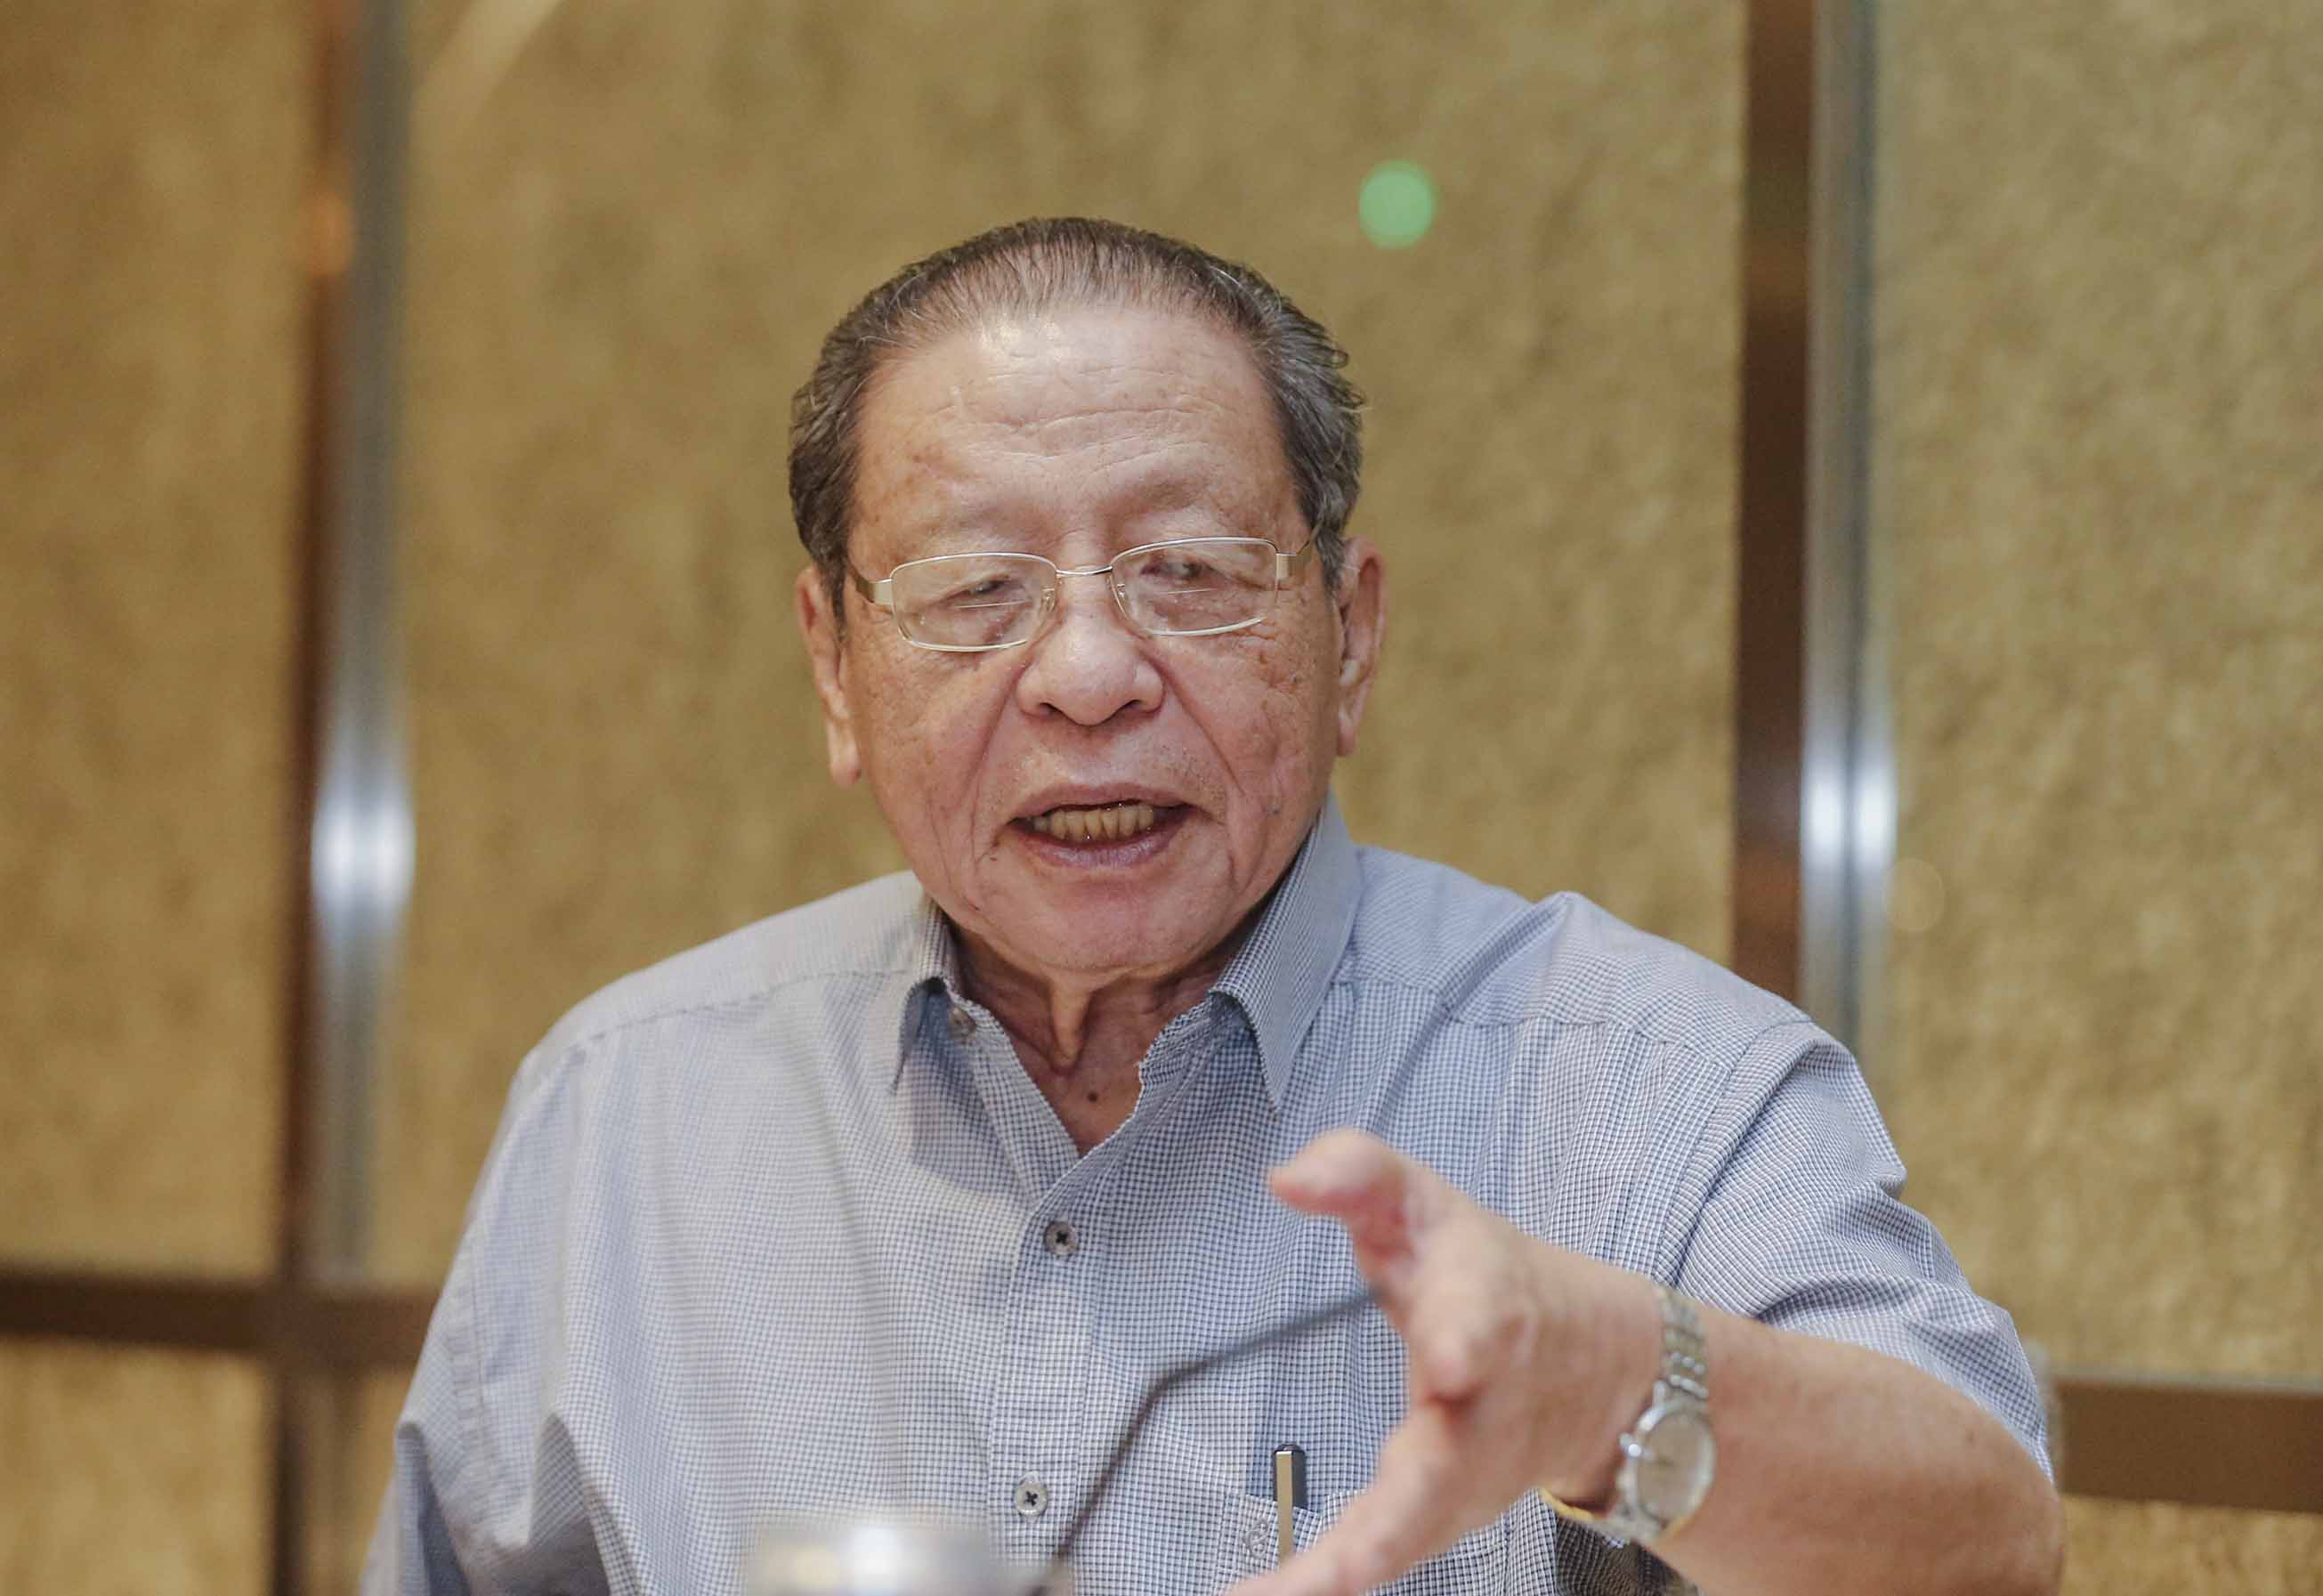 DAP's Lim Kit Siang expressed surprise over Dr Mahathir’s remark, labelling it as his 'own conjecture' and called the latter’s resignation that led to PH’s collapse after just 22 months as the federal government an 'egregious blunder'. — Picture by Firdaus Latif